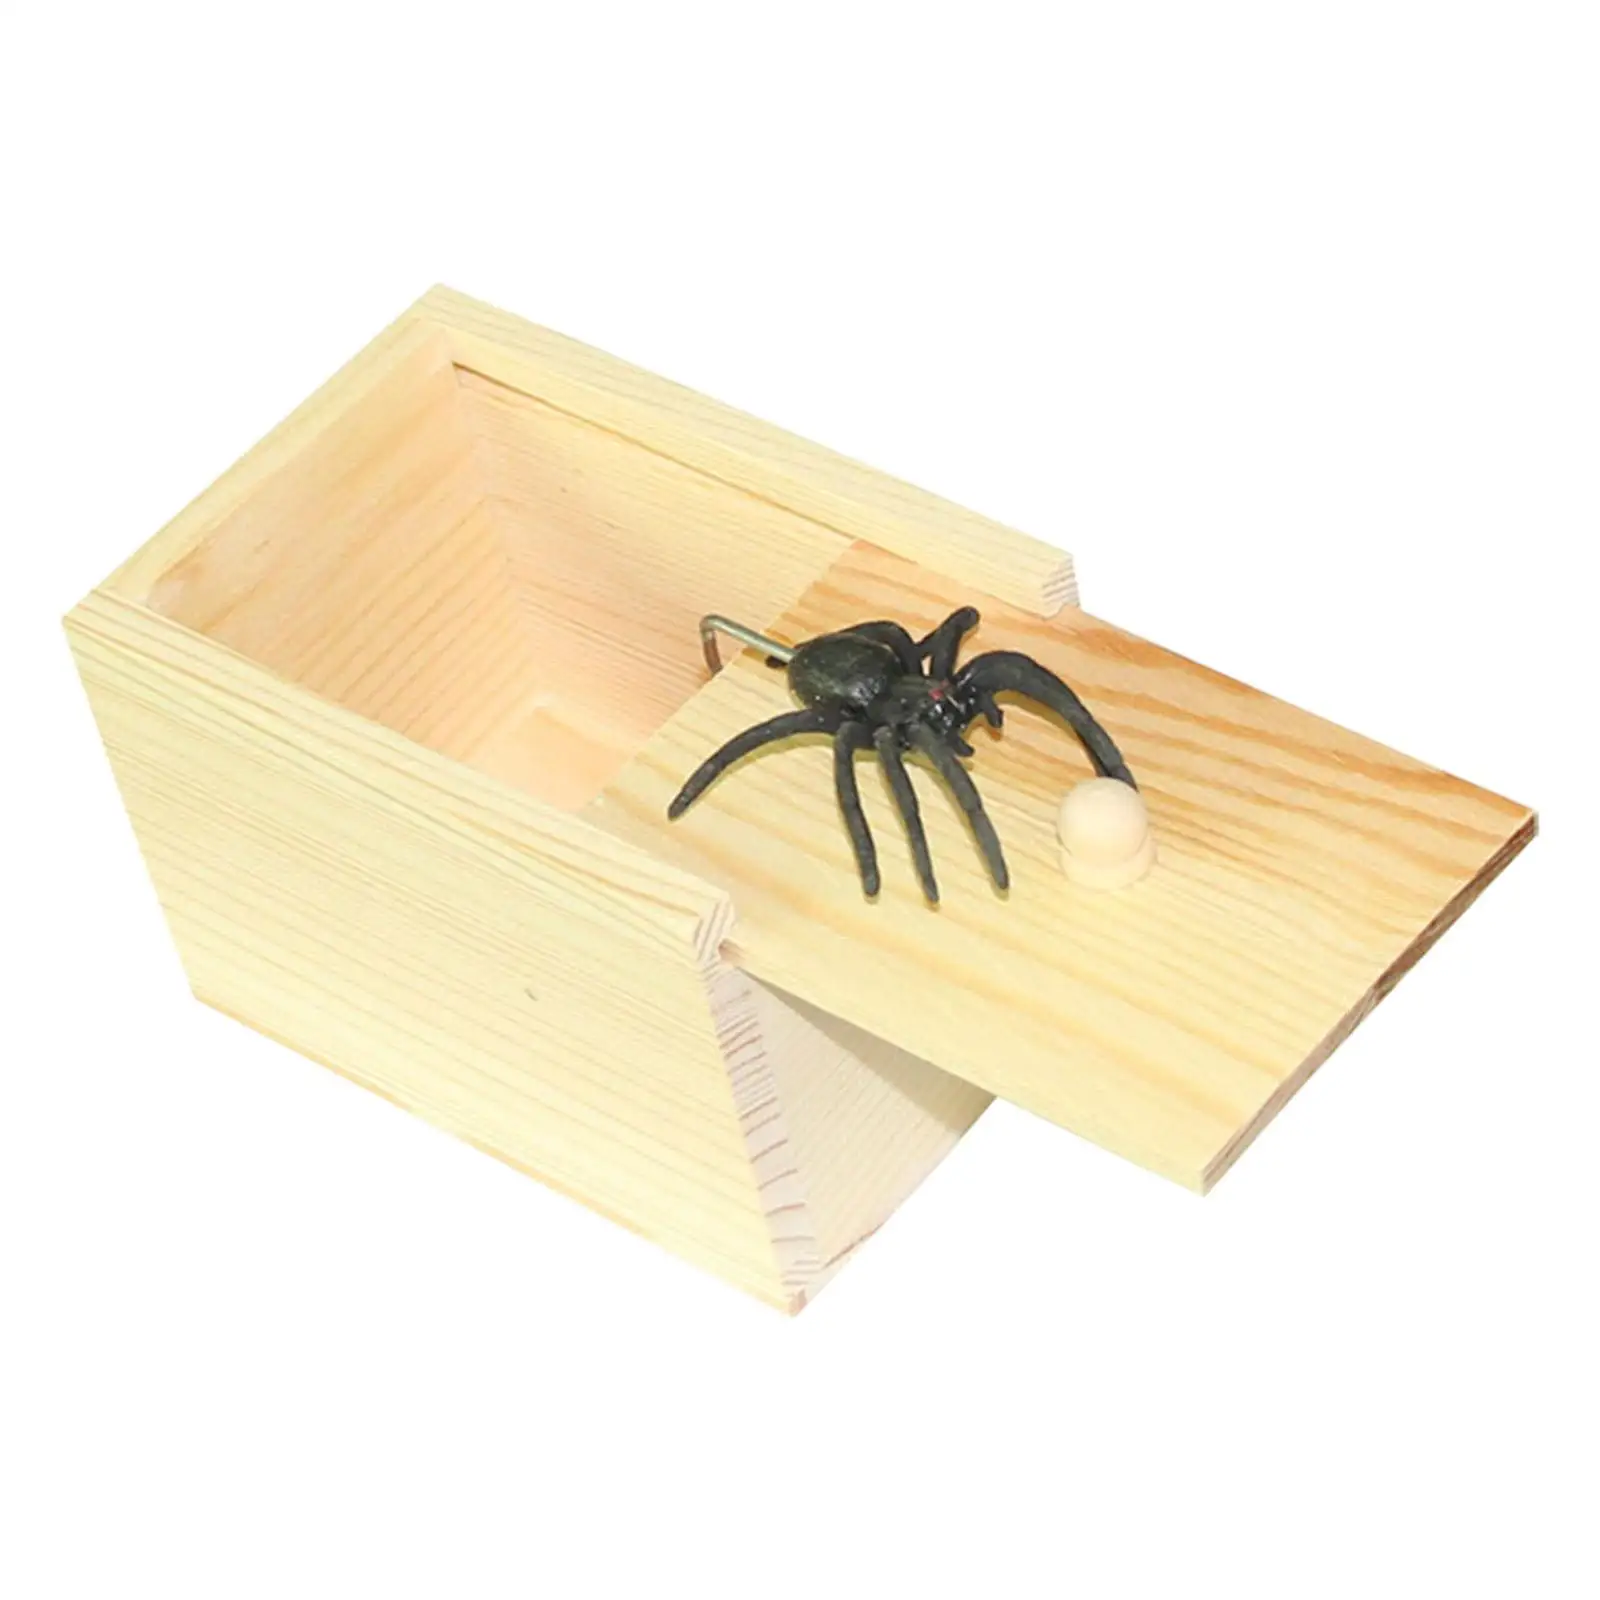 Spider Prank Scare Box Practical Joke Toys Tricky Toy Handmade Fun Practical Joke Boxes for Halloween Carnivals Adults Gifts